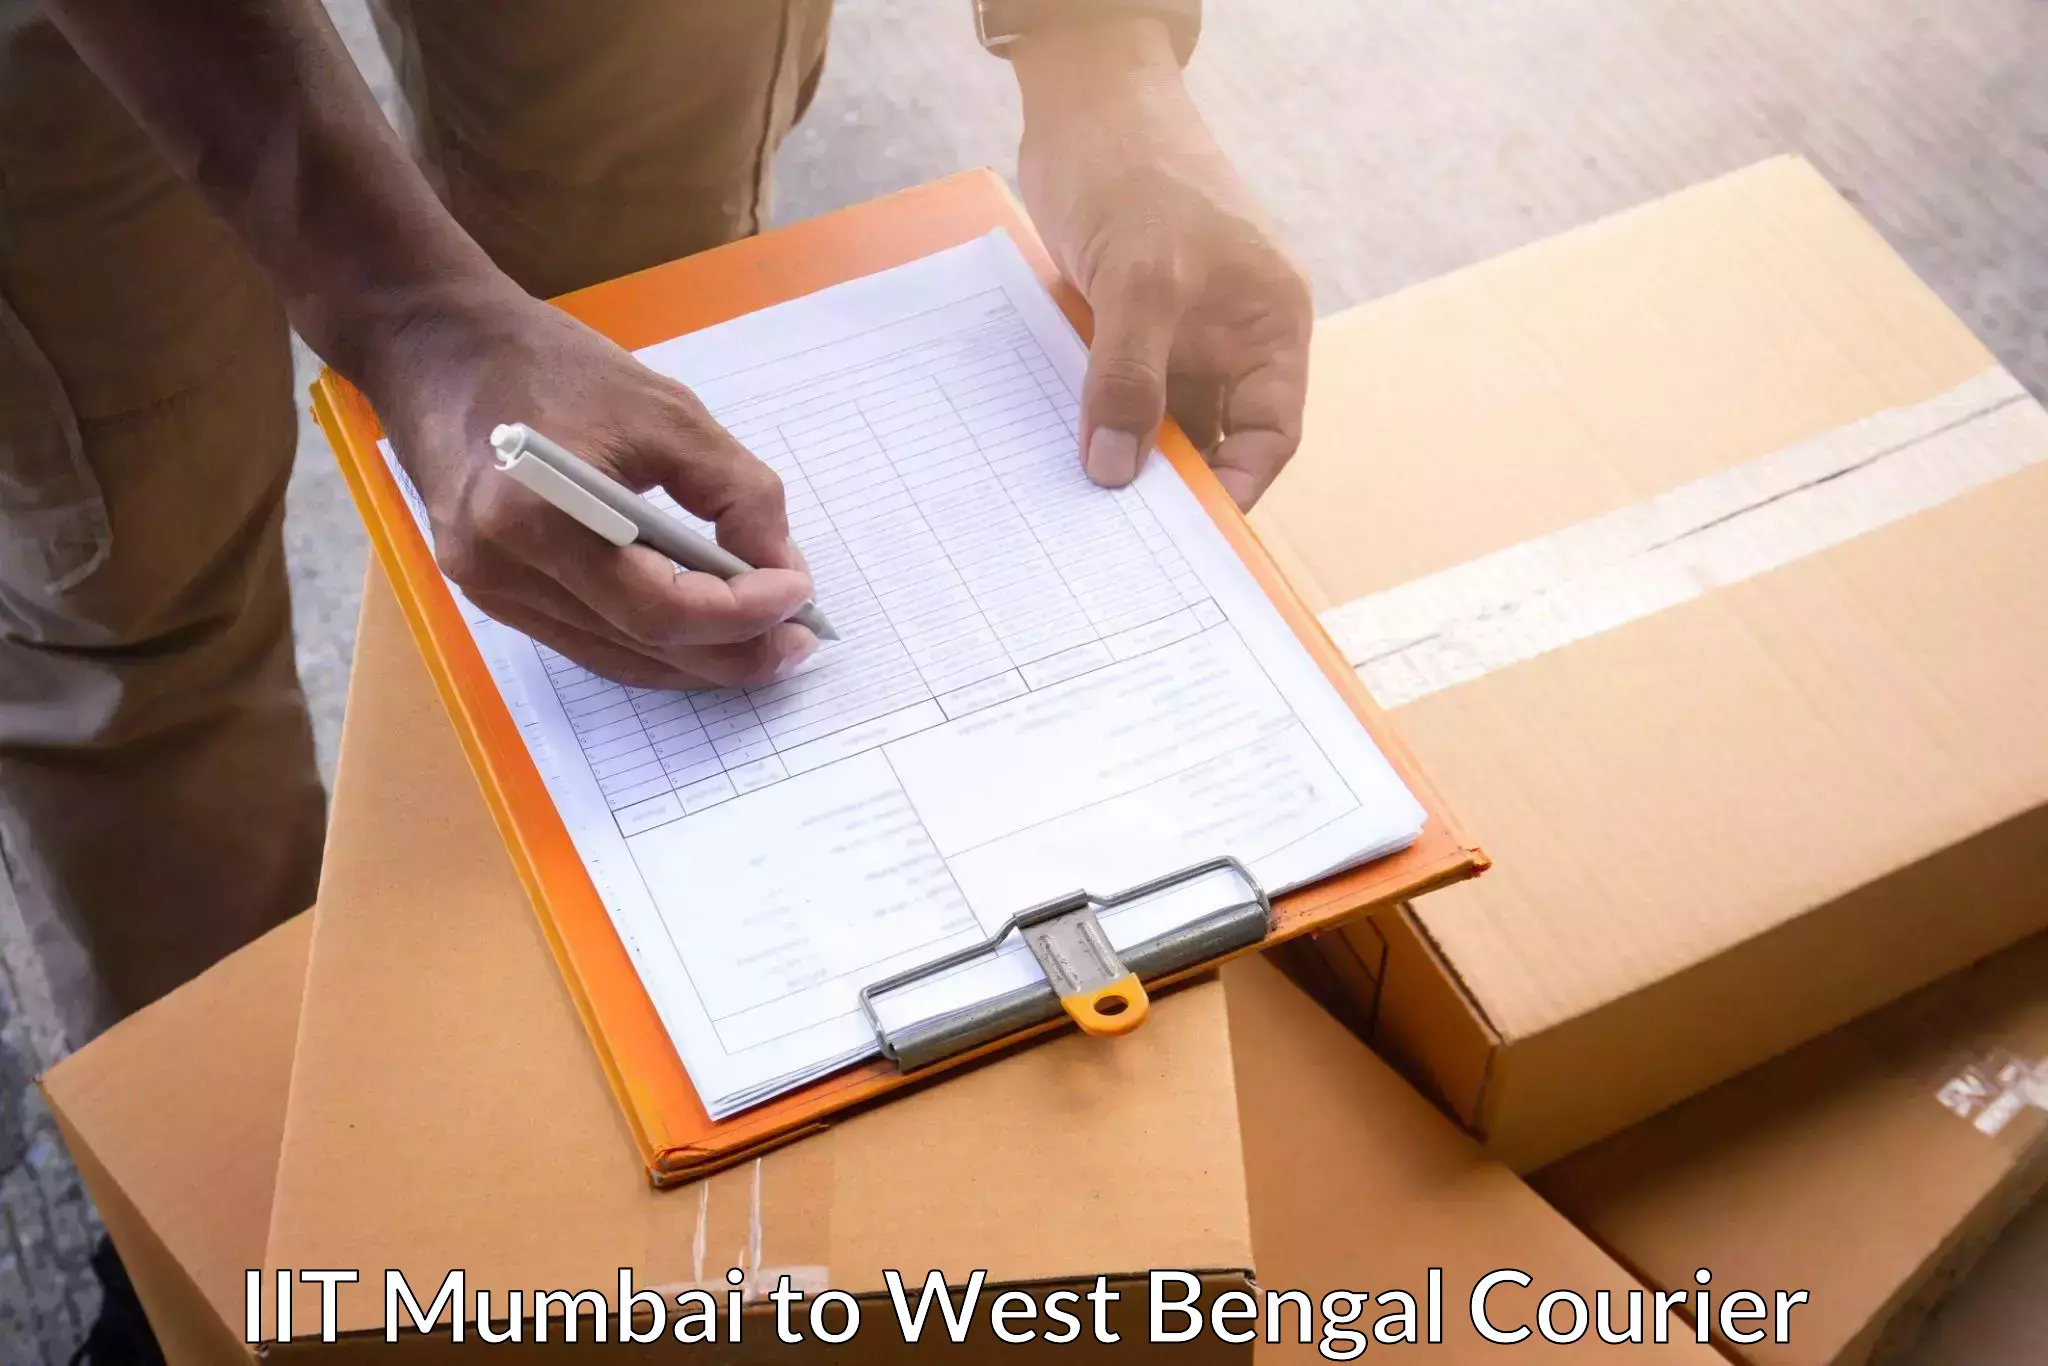 Weekend courier service IIT Mumbai to West Bengal